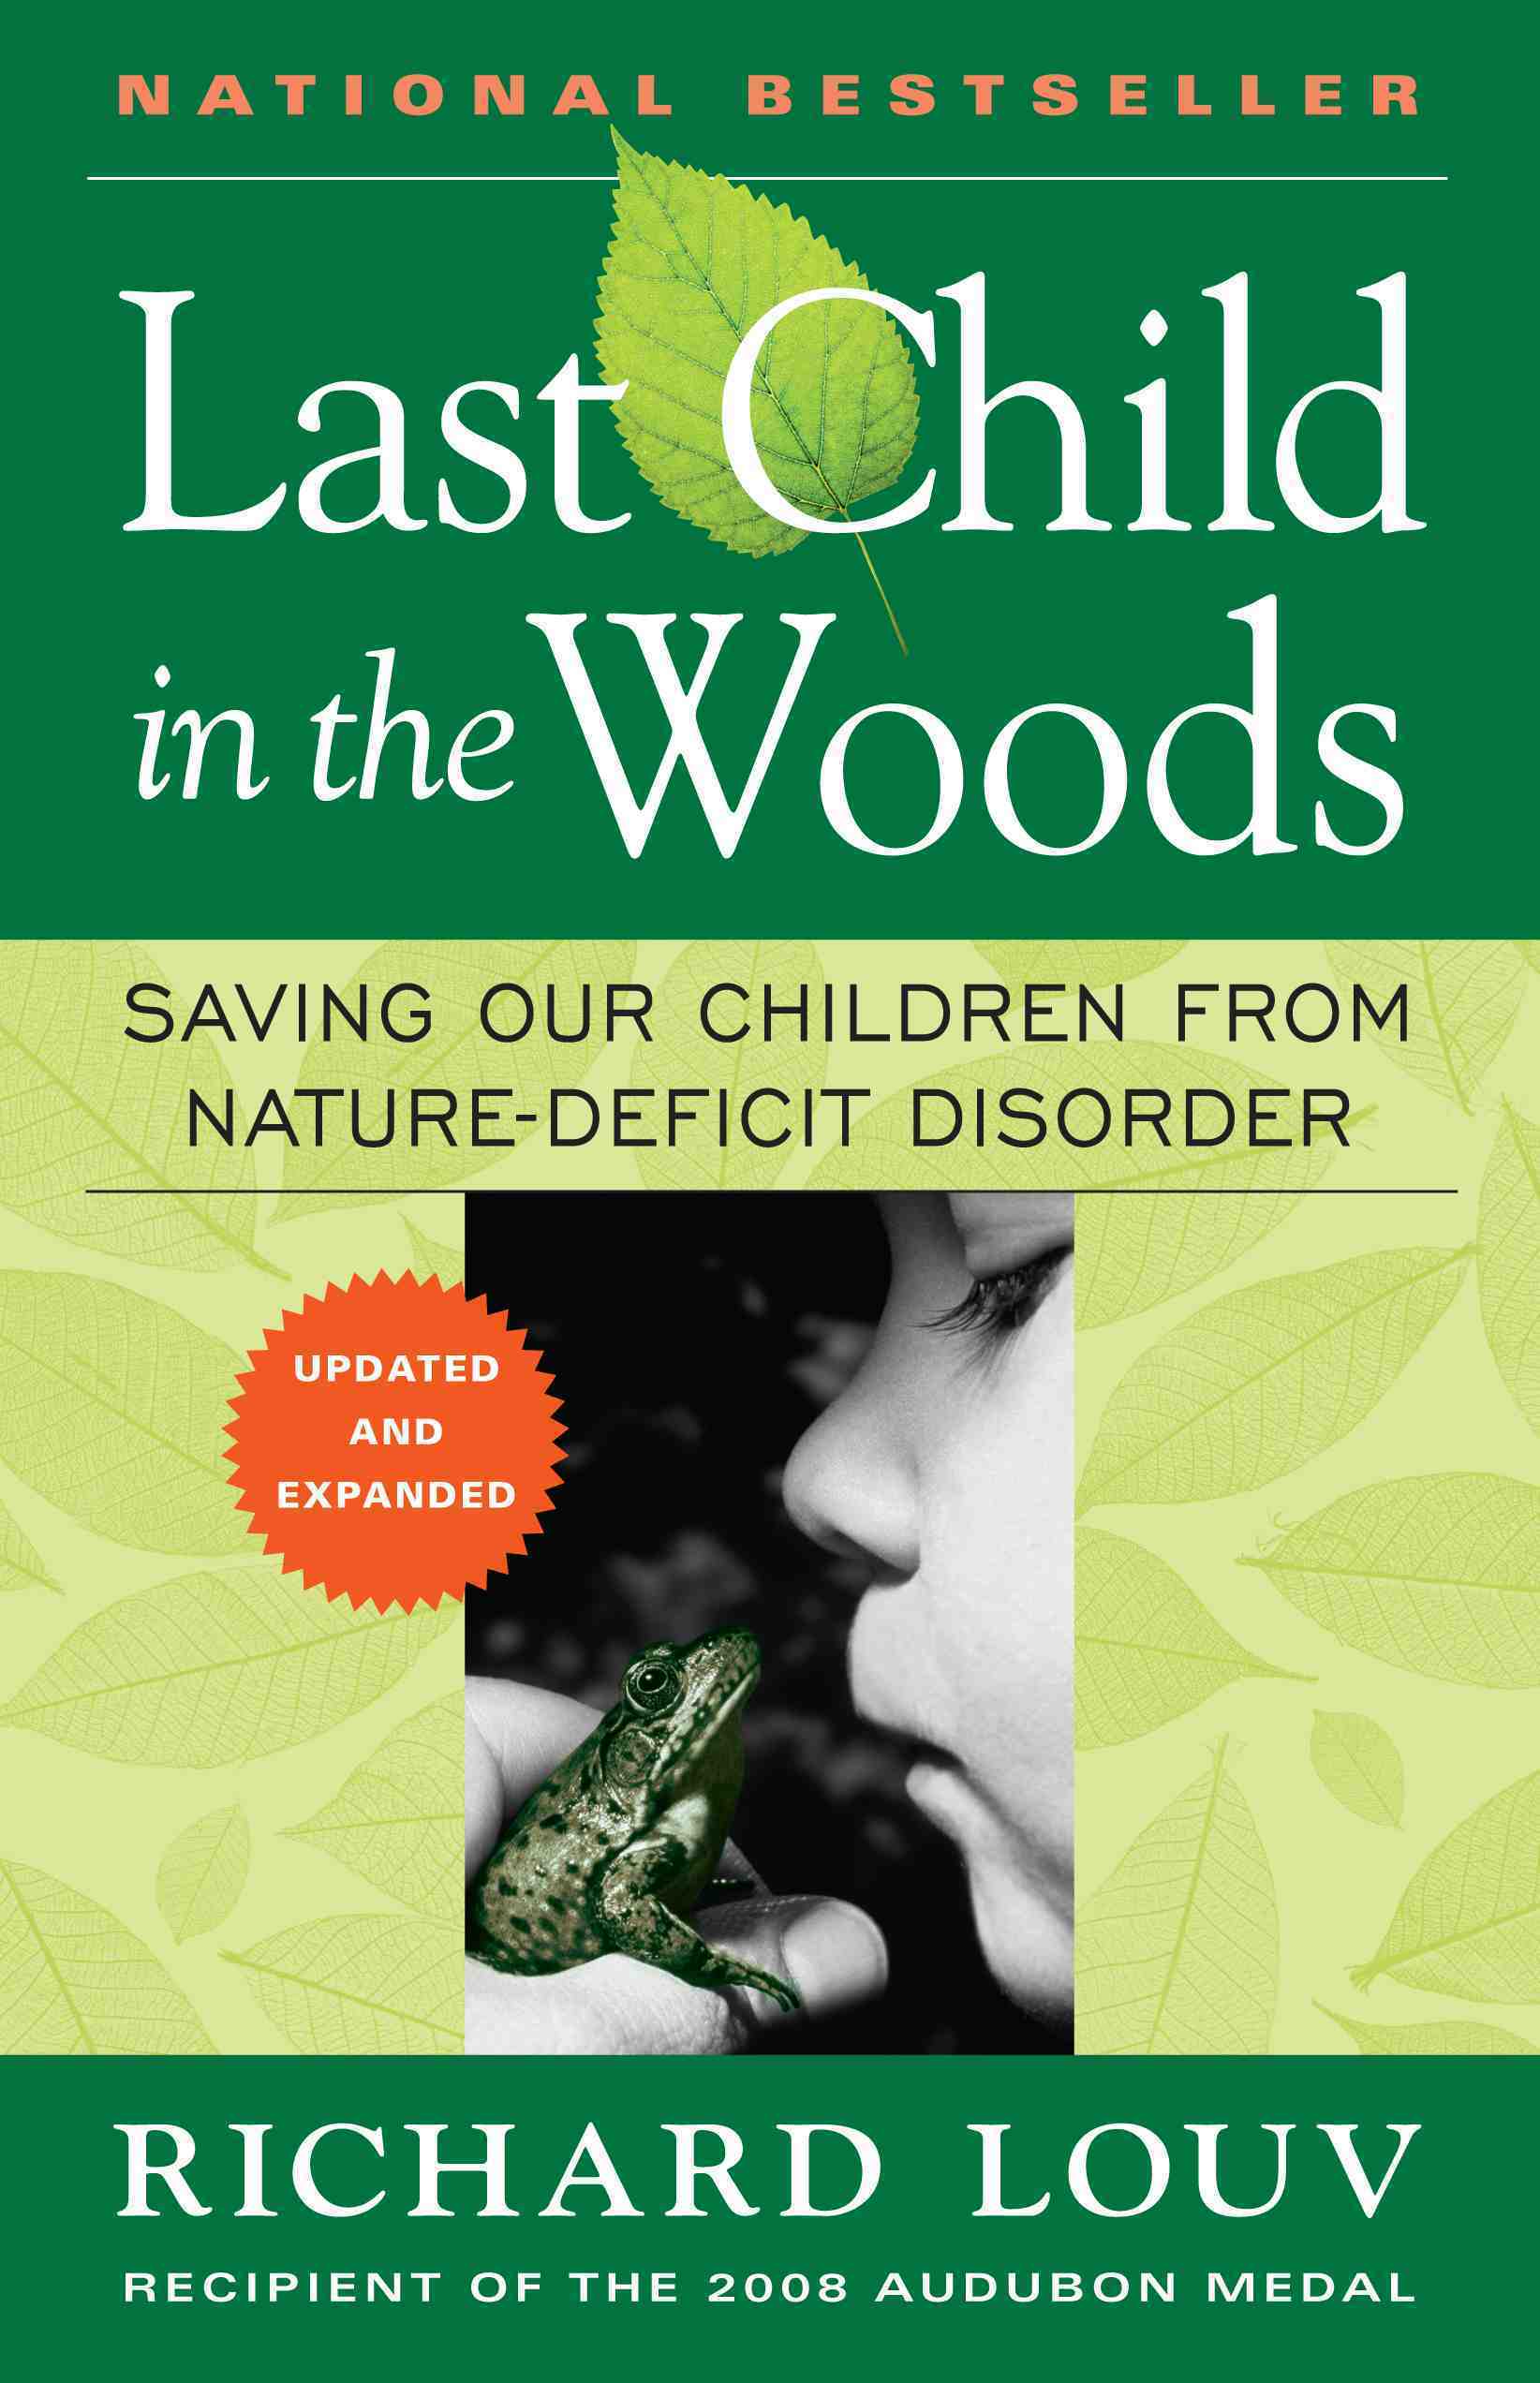 The cover art for Last Child in the Woods: Saving Our Children From Nature-Deficit Disorder